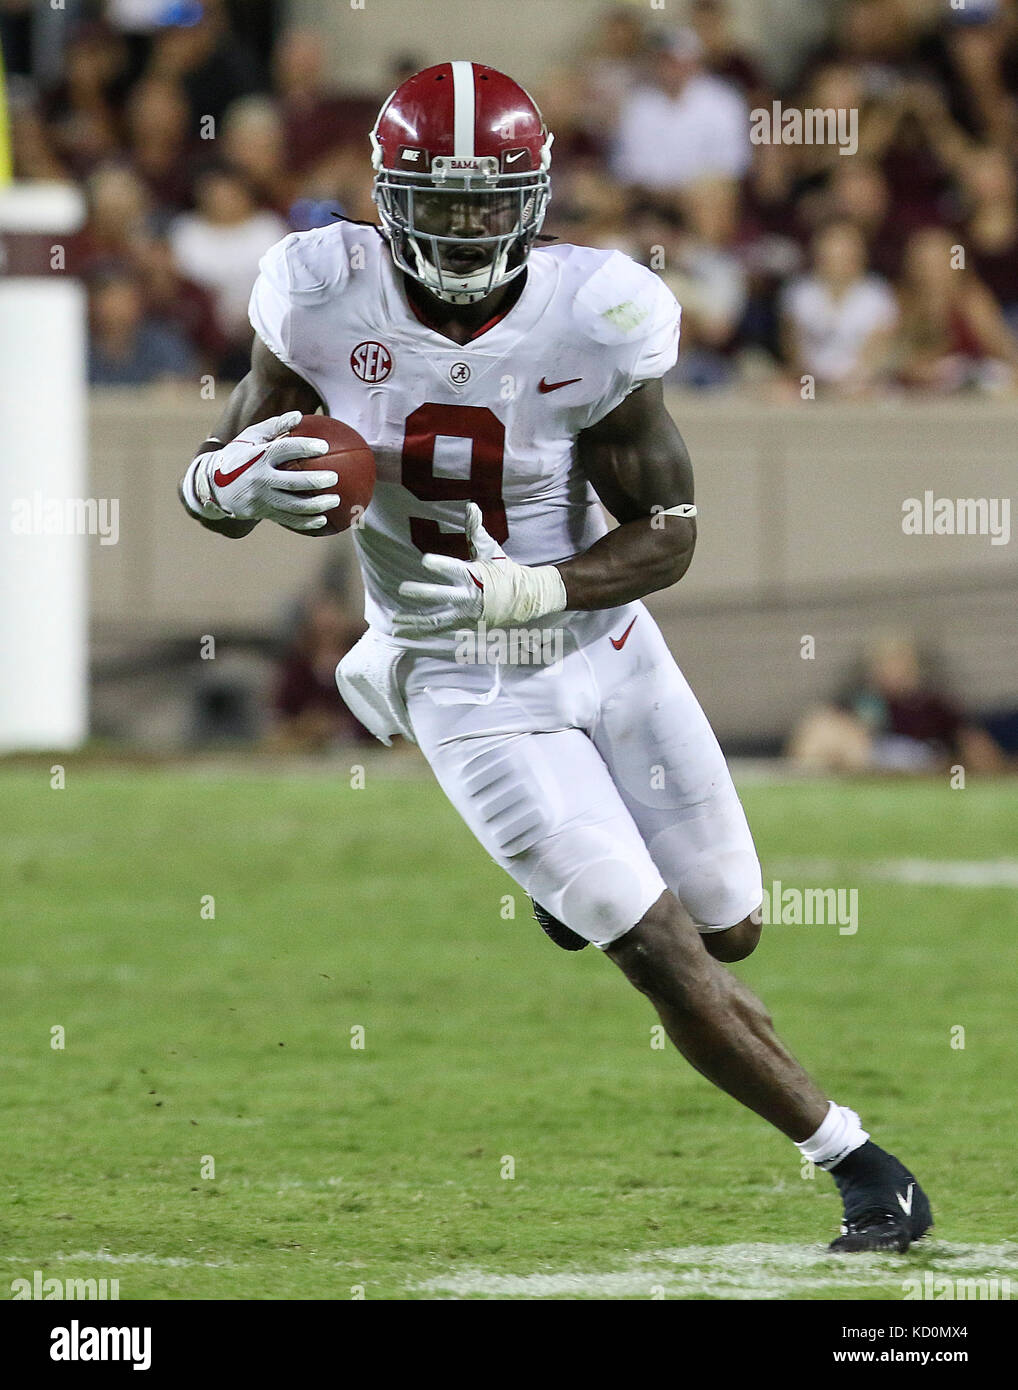 October 6, 2017: Alabama Crimson Tide running back Bo Scarbrough (9) during the NCAA football game between the Alabama Crimson Tide and the Texas A&M Aggies at Kyle Field in College Station, TX; John Glaser/CSM. Stock Photo